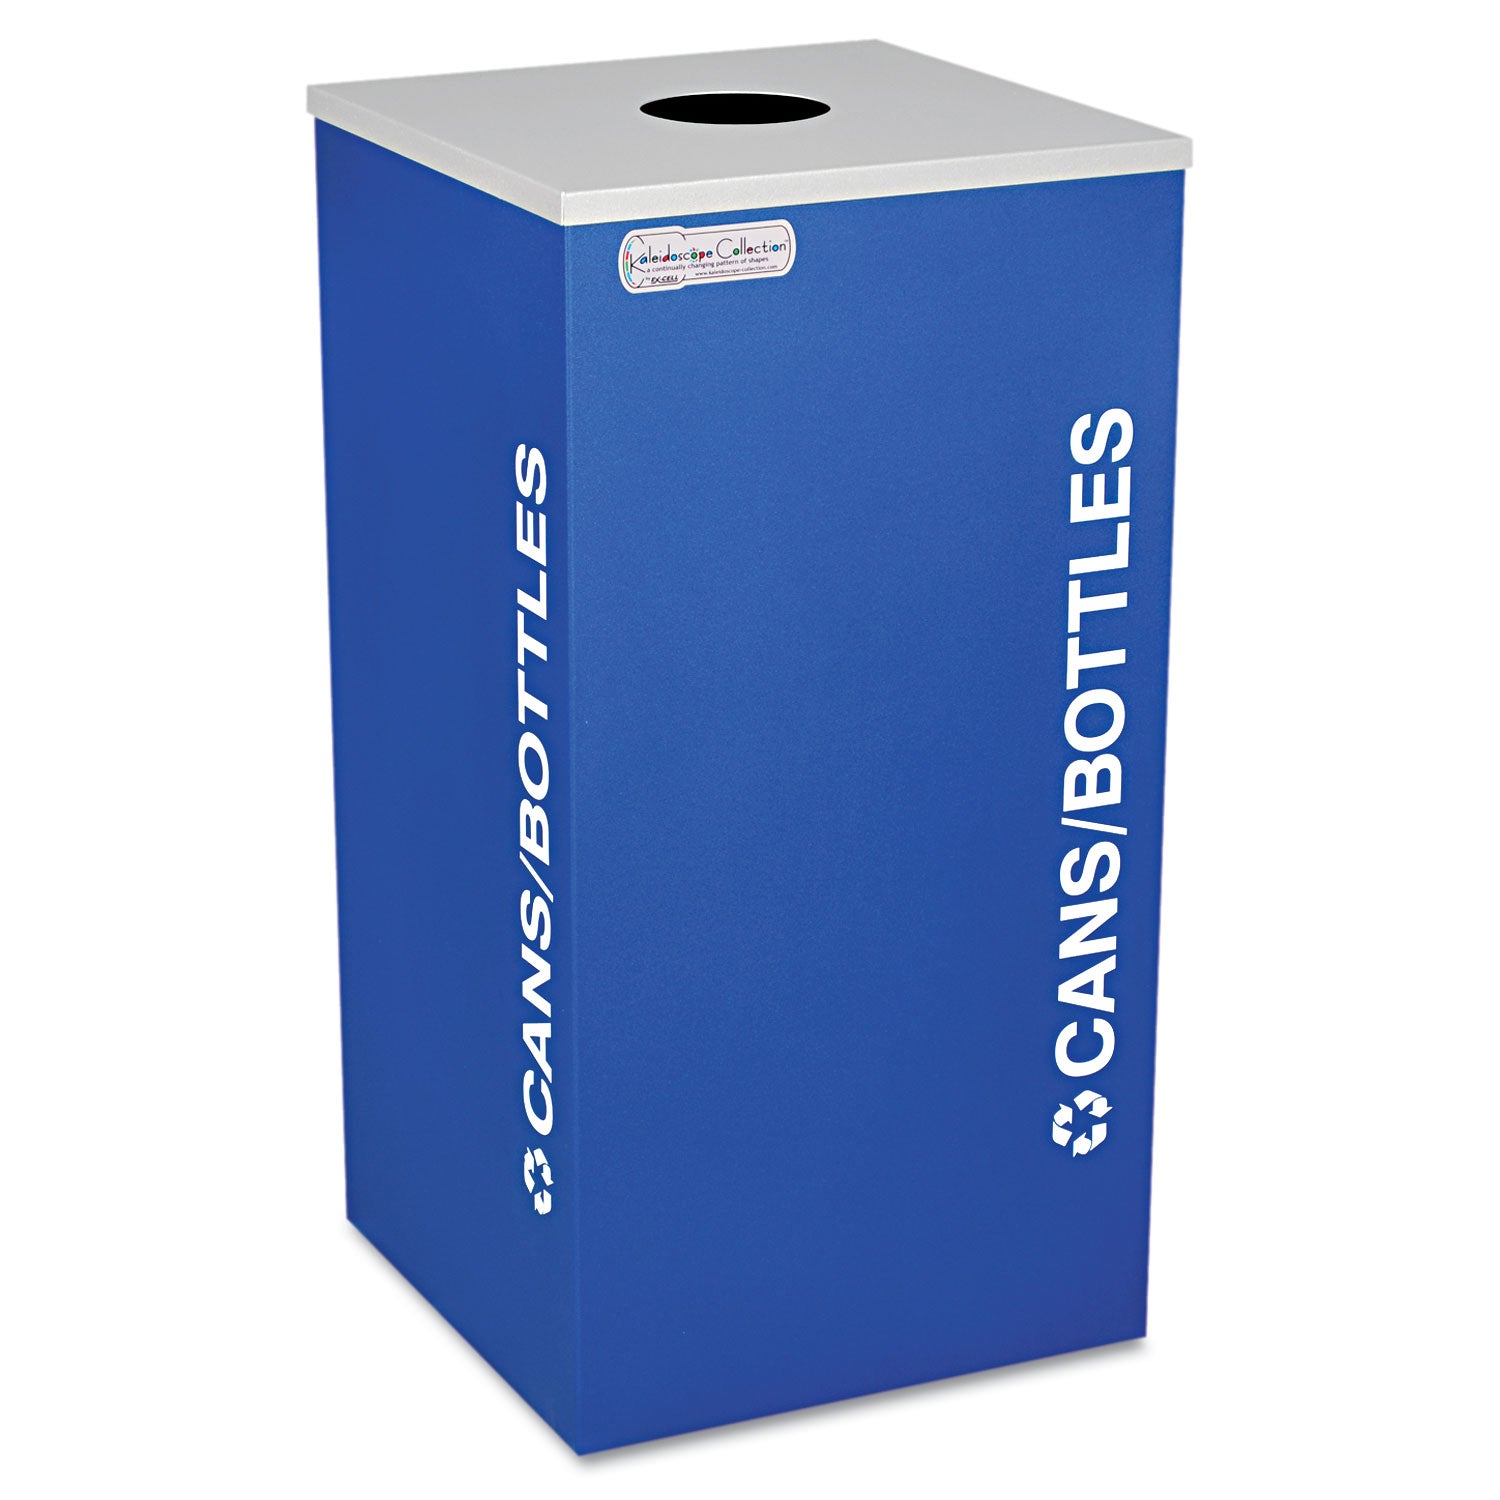 Kaleidoscope Collection Bottle/Can Recycling Receptacle, 24 gal, Steel, Royal Blue - 